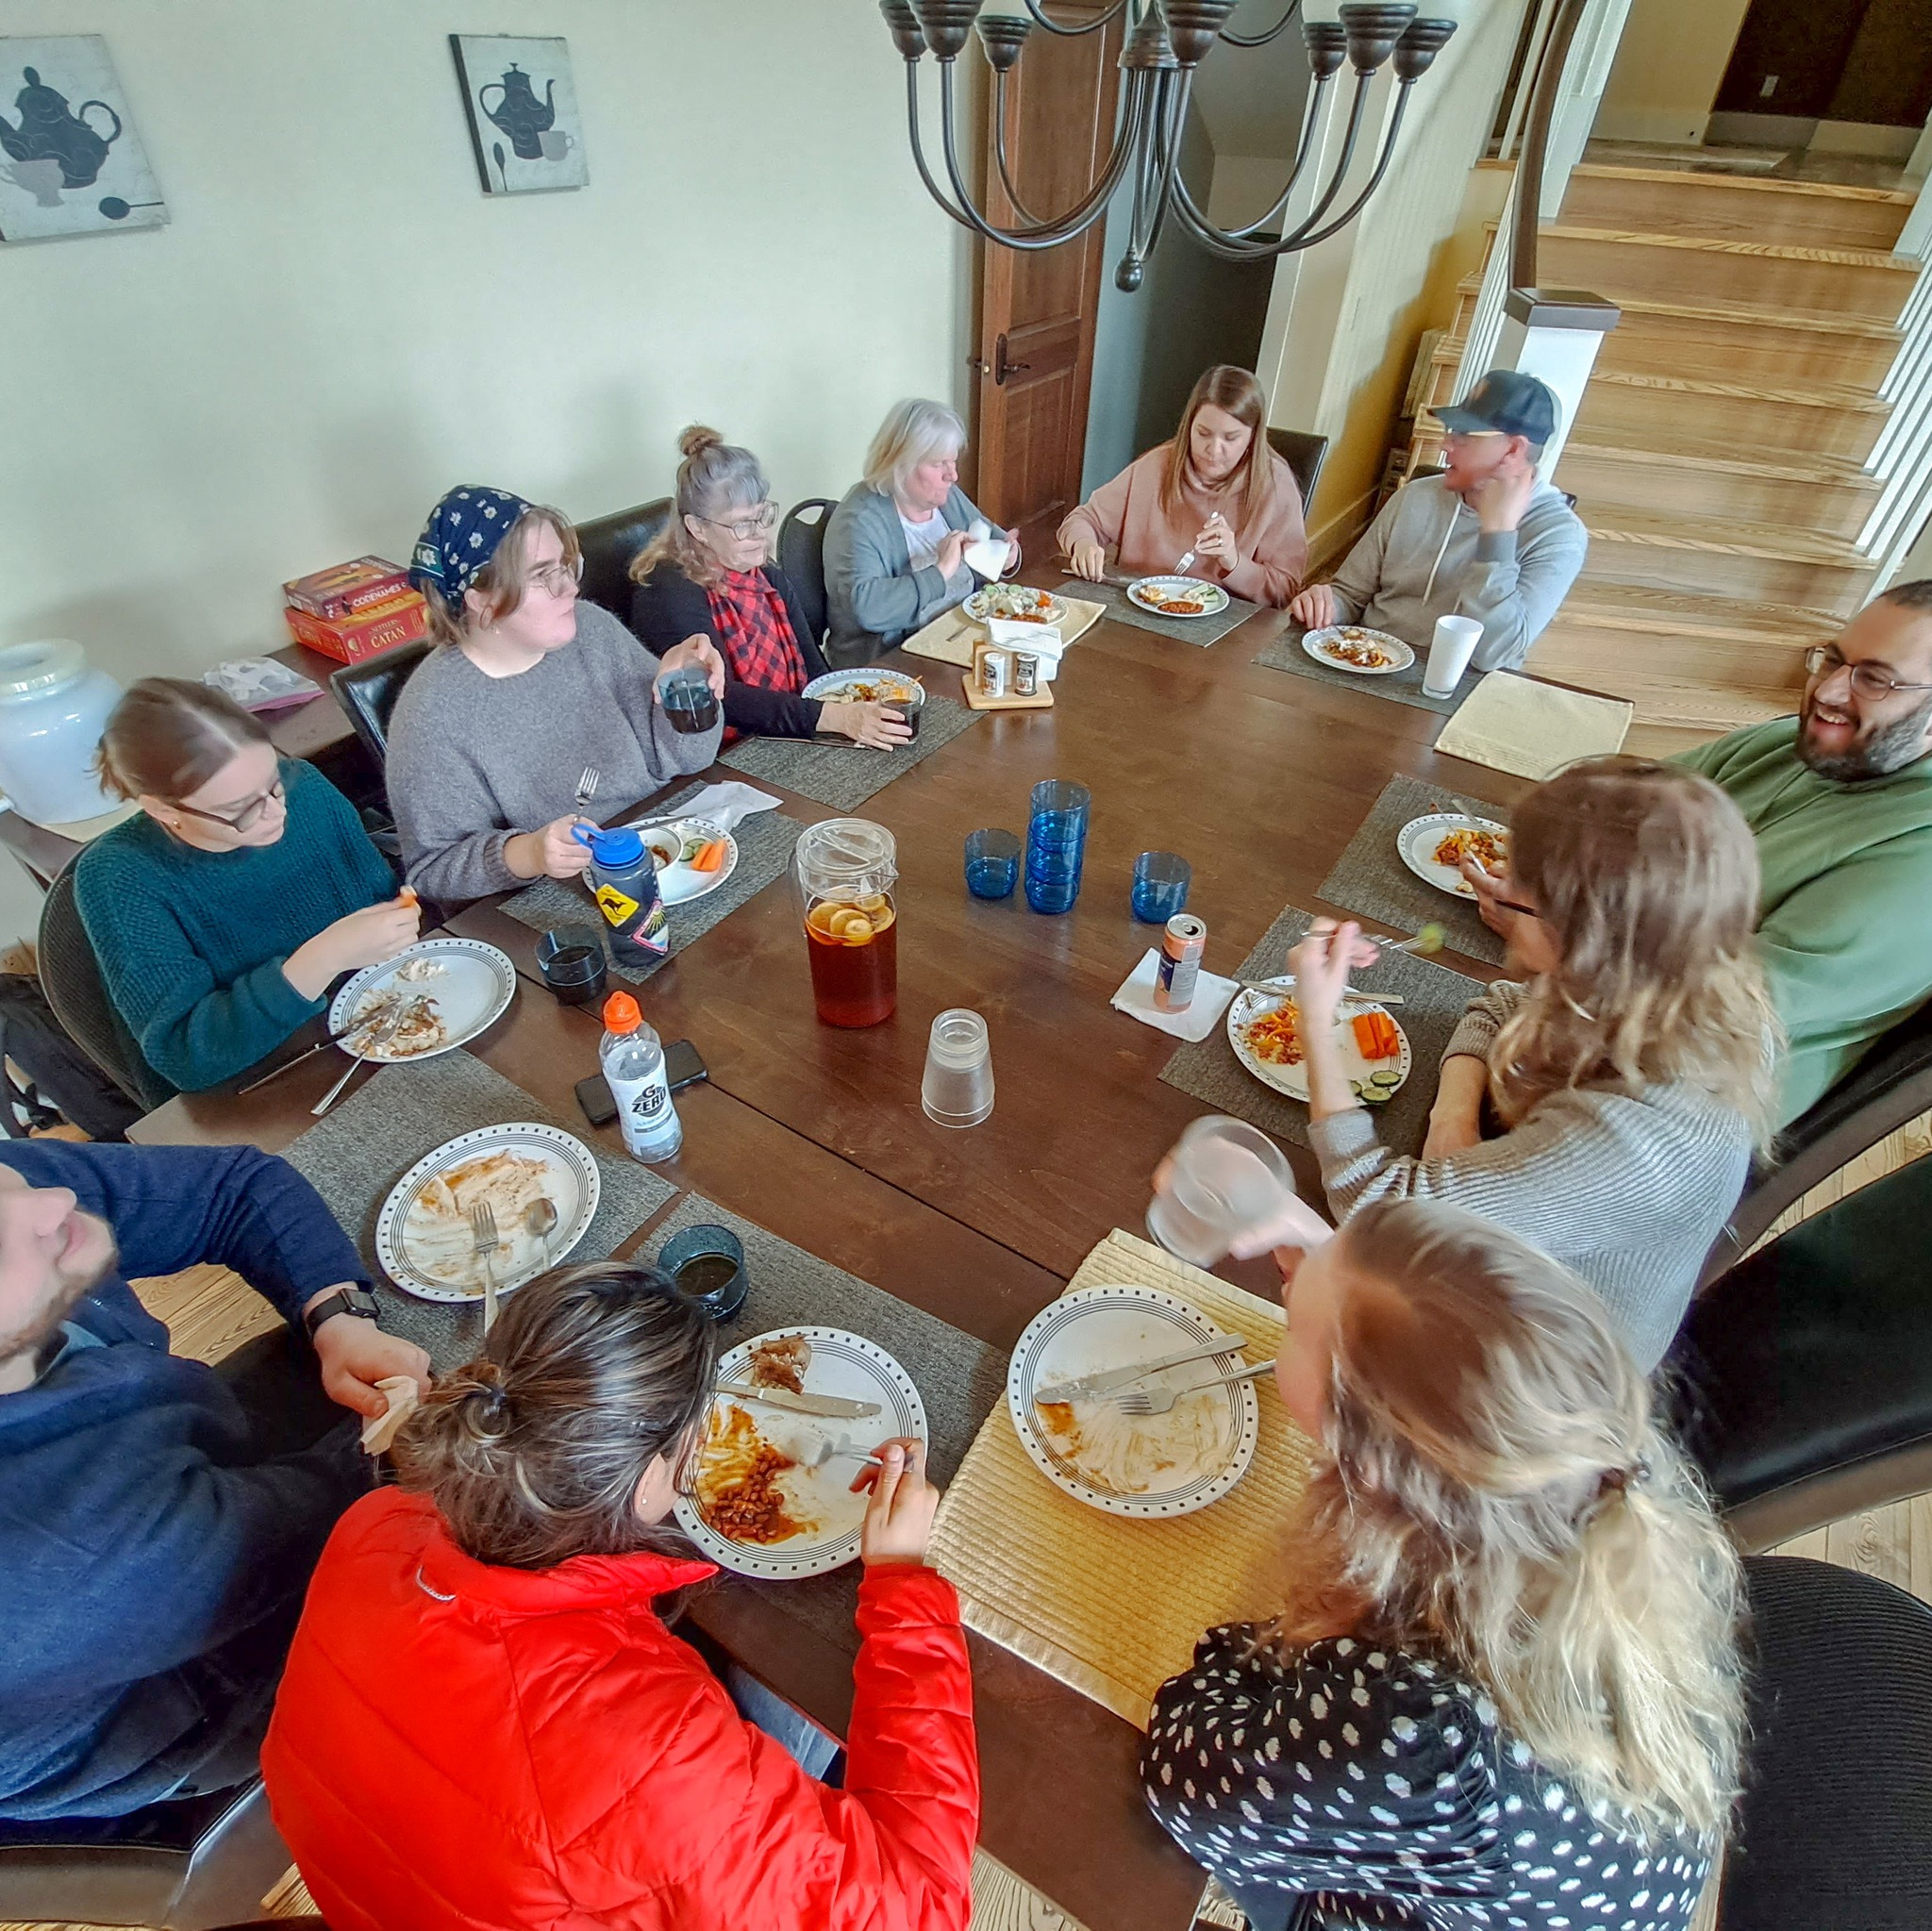 We love eating together. Lots of the strength of YWAM is found in community. We eat together, play, study, minister, and work together. We believe living community is a great way to grow up and experience unconditional love. Tag a friend! 
.
.